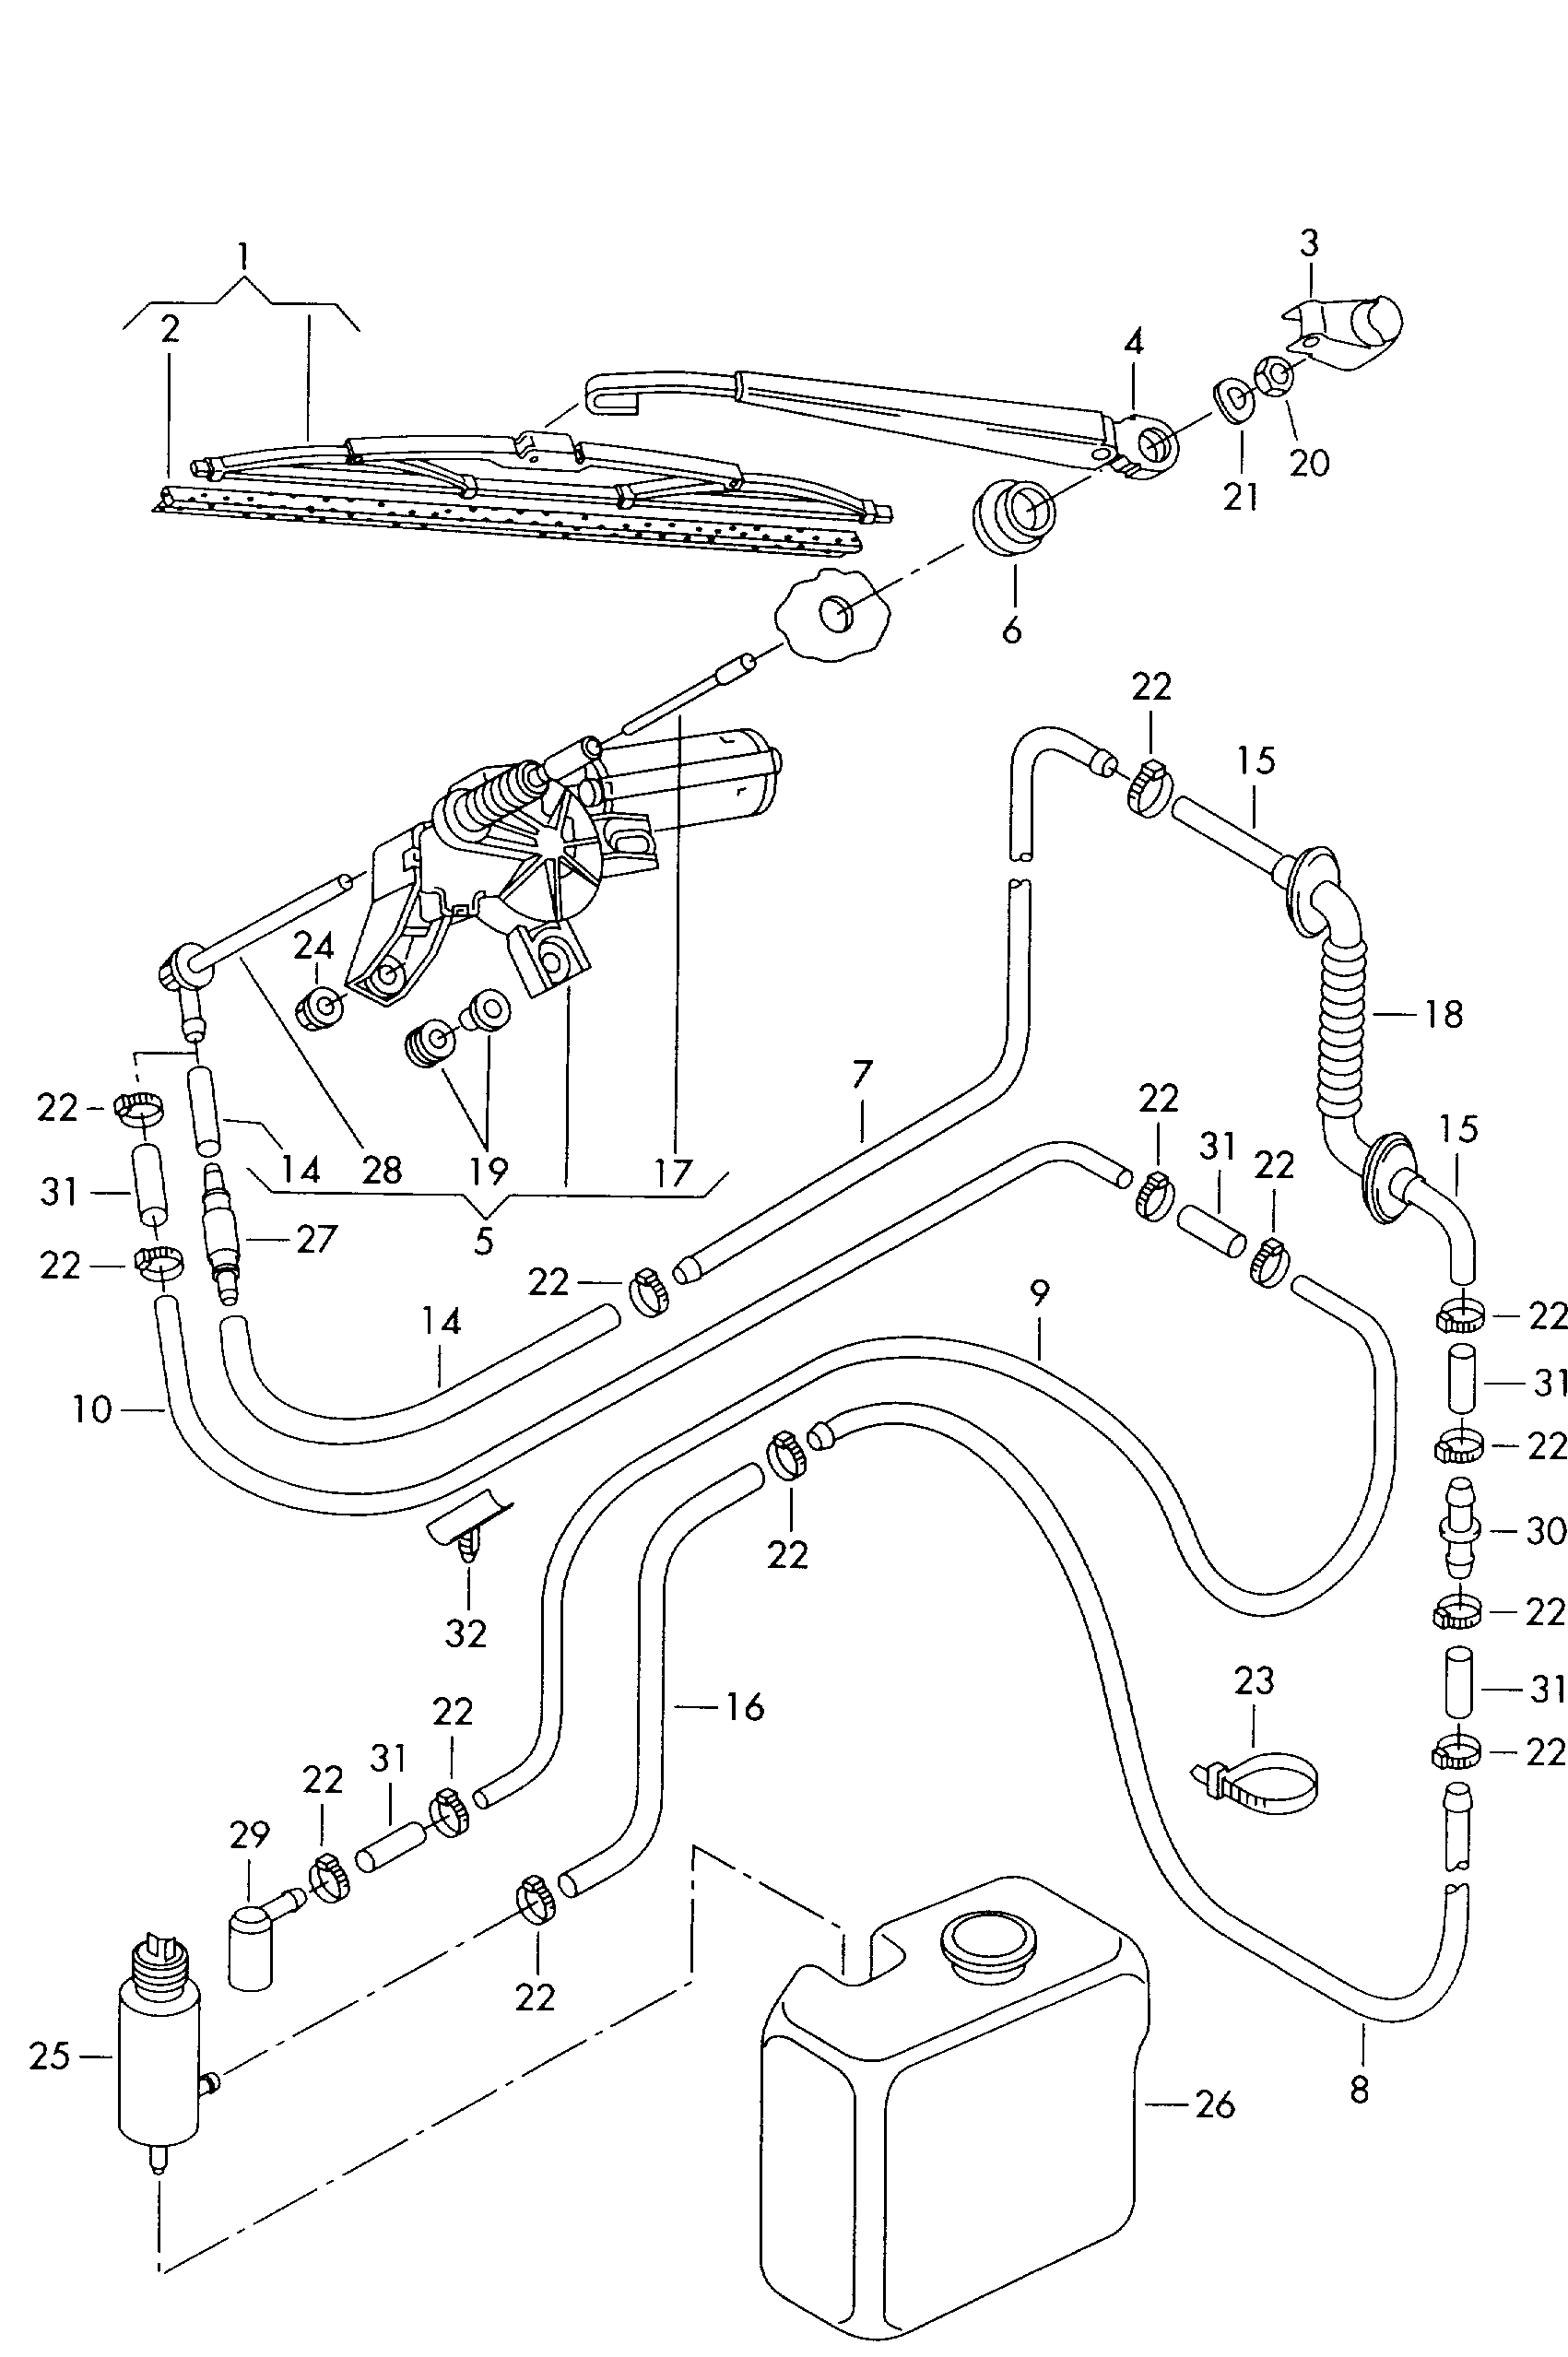 Wiper and washer system for<br>rear window  - Golf/Variant/4Motion - golf